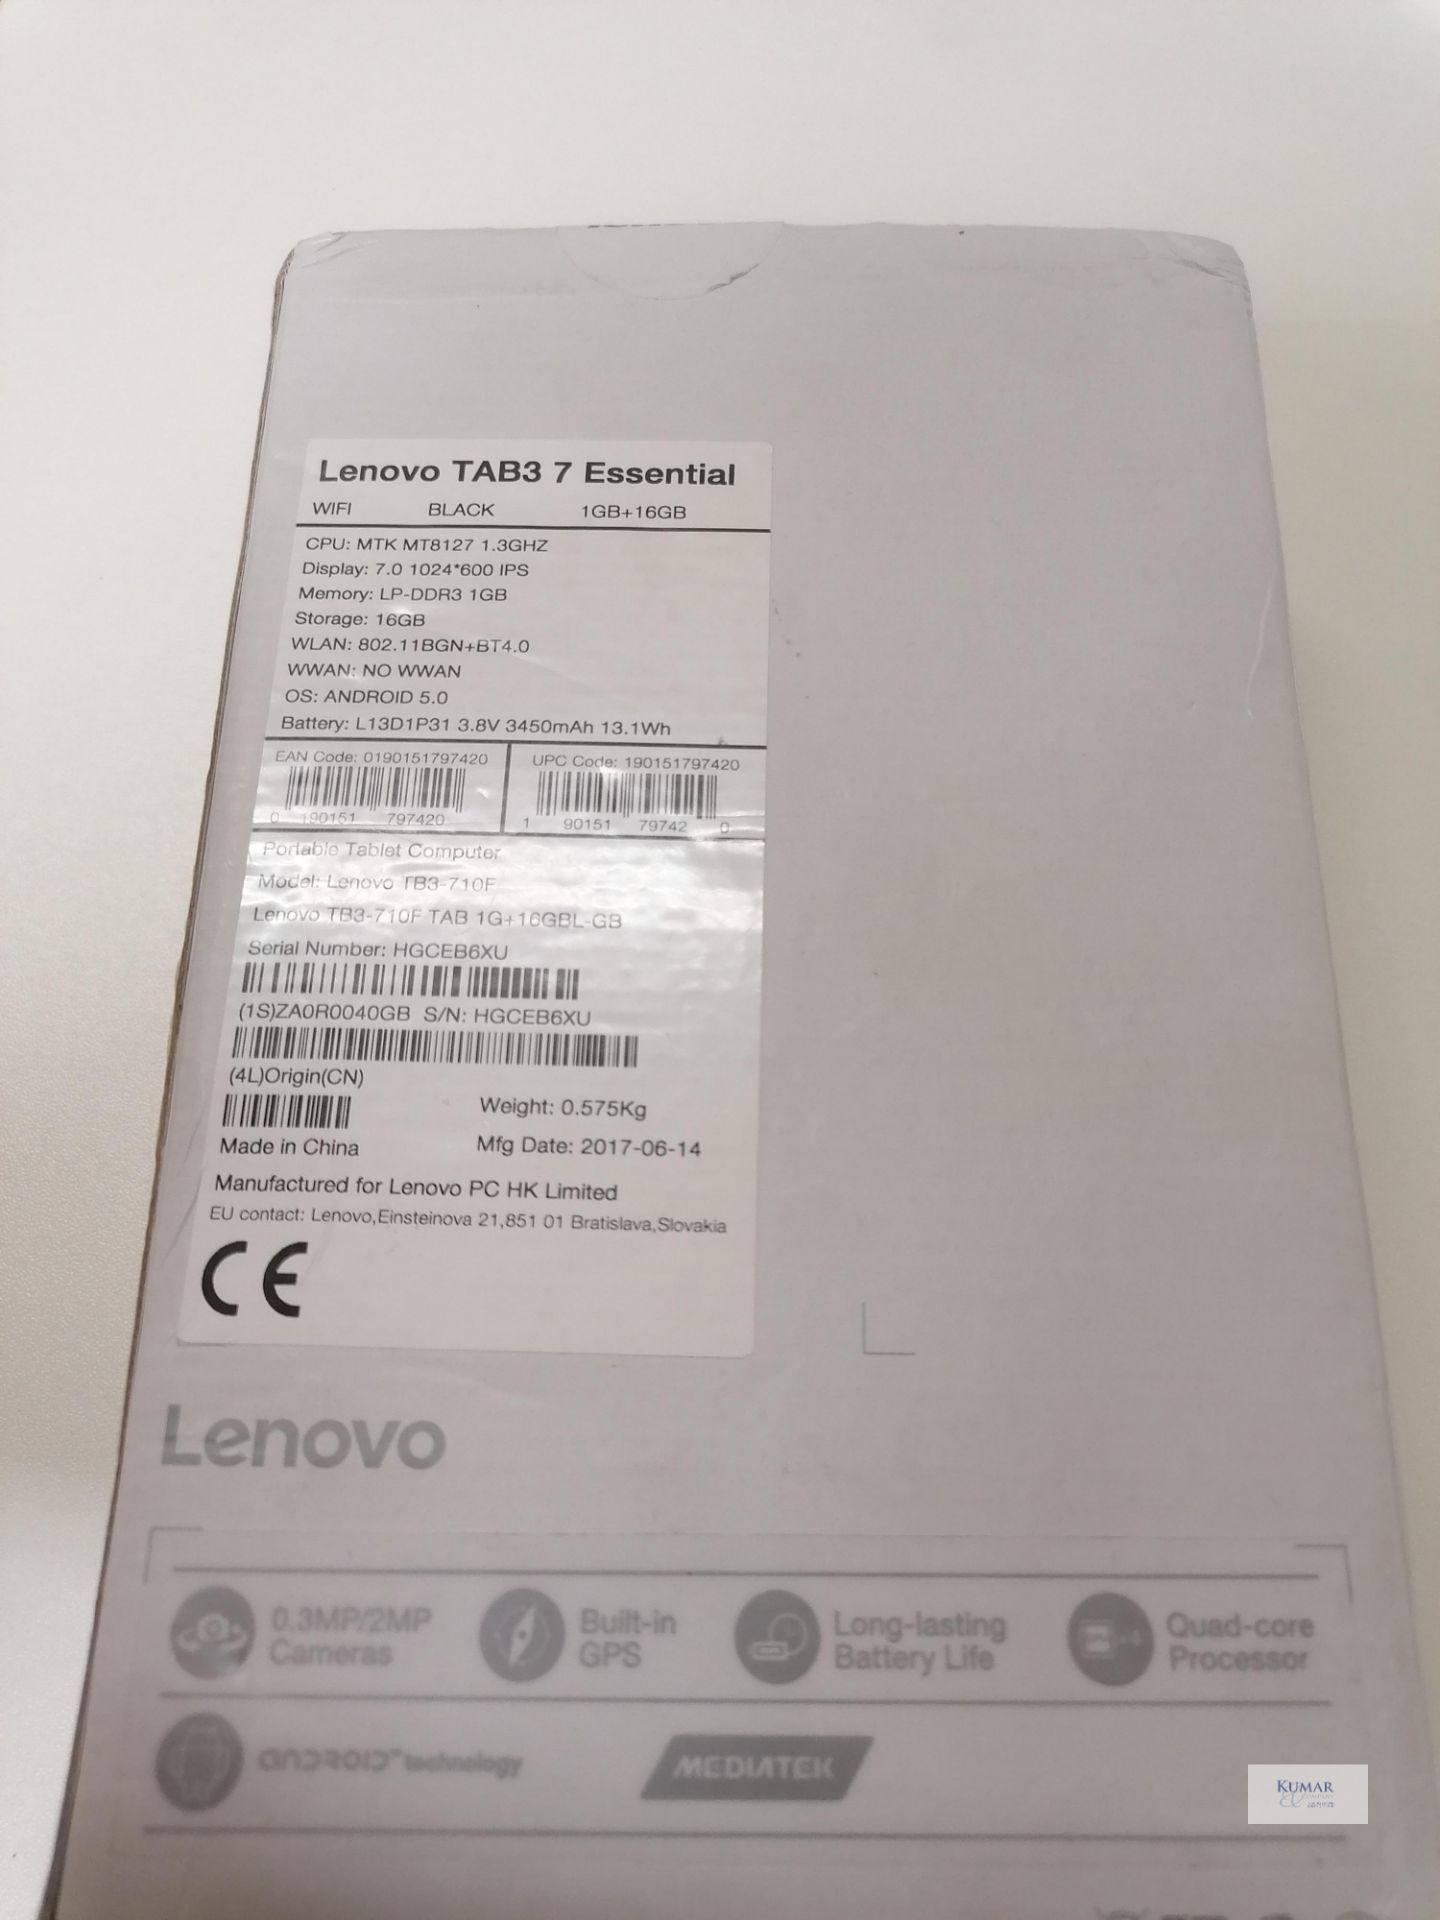 Lenovo TB3-710F 7" 16GB Table Man 14 06 2017 Updated 21 10 2020 In box,cable and charger - Image 5 of 6